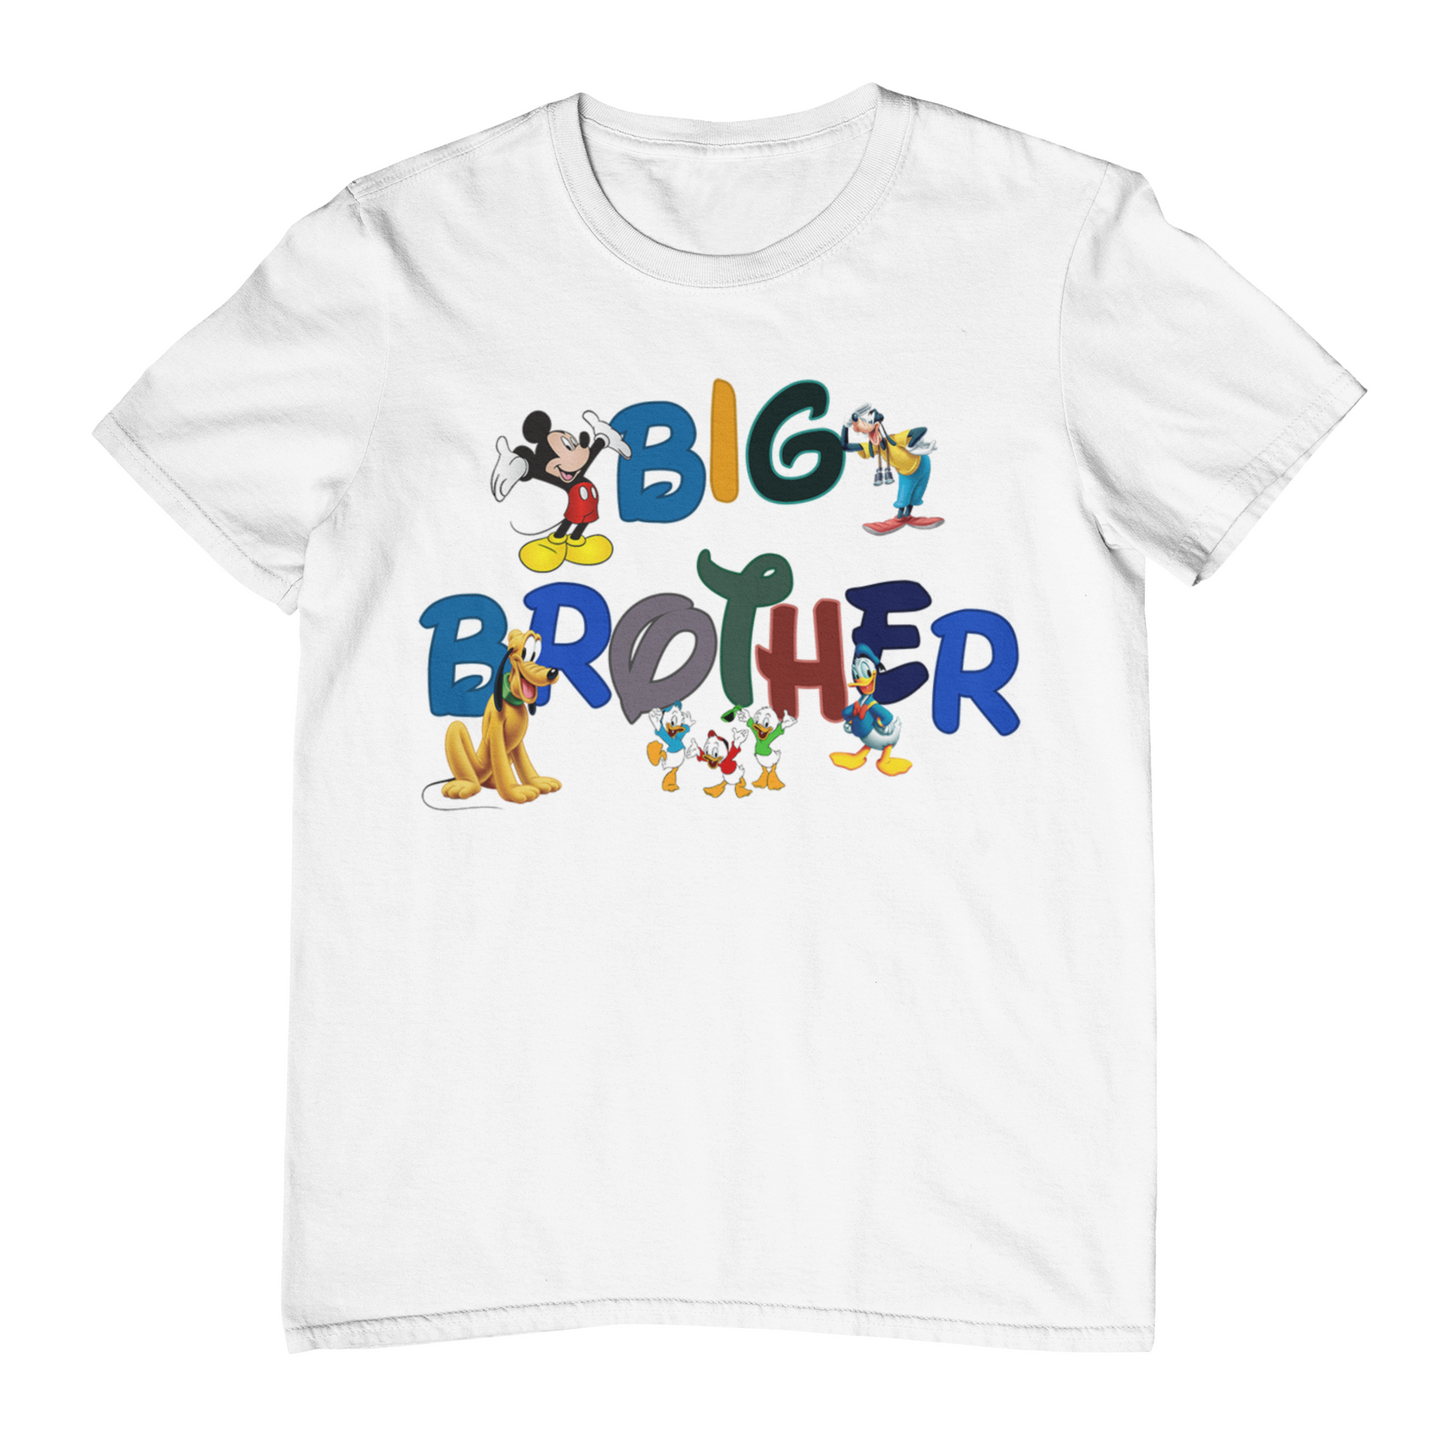 Big Brother Mickey shirt - Mickey  and friends shirts - Big  Brother boys shirt - Big Brother shirt